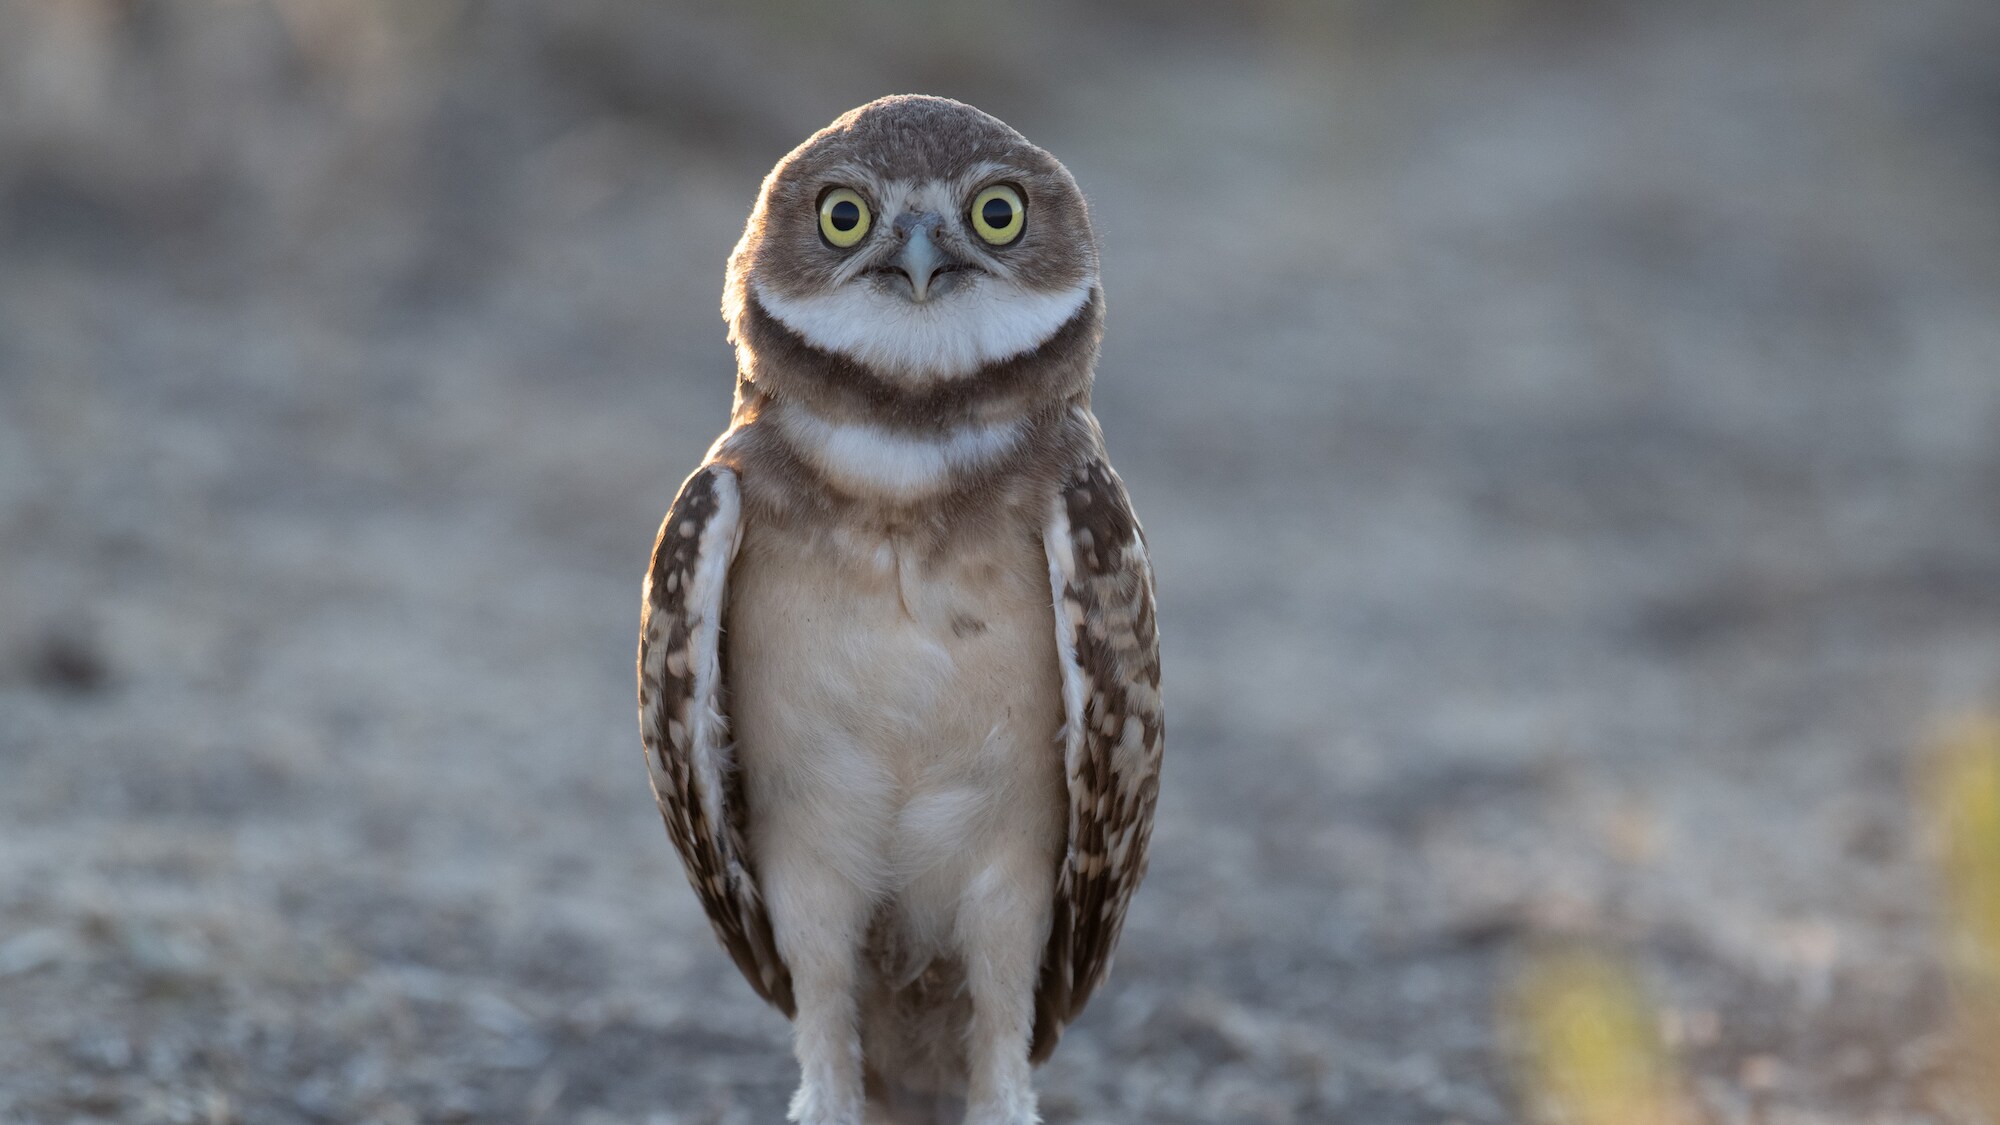 An Owl stands on dirt road and looks straight at photographer at Umatilla Chemical Depot.  (National Geographic for Disney+/Matt Poole)